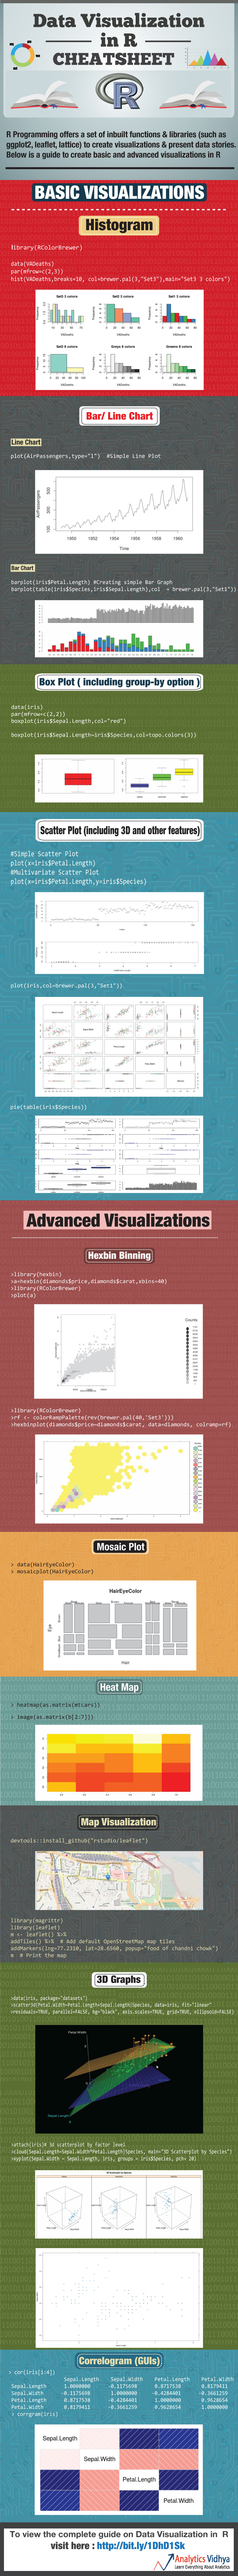 Comprehensive-Guide-to-Data-Visualization-in--R-------FINAL---- (1)